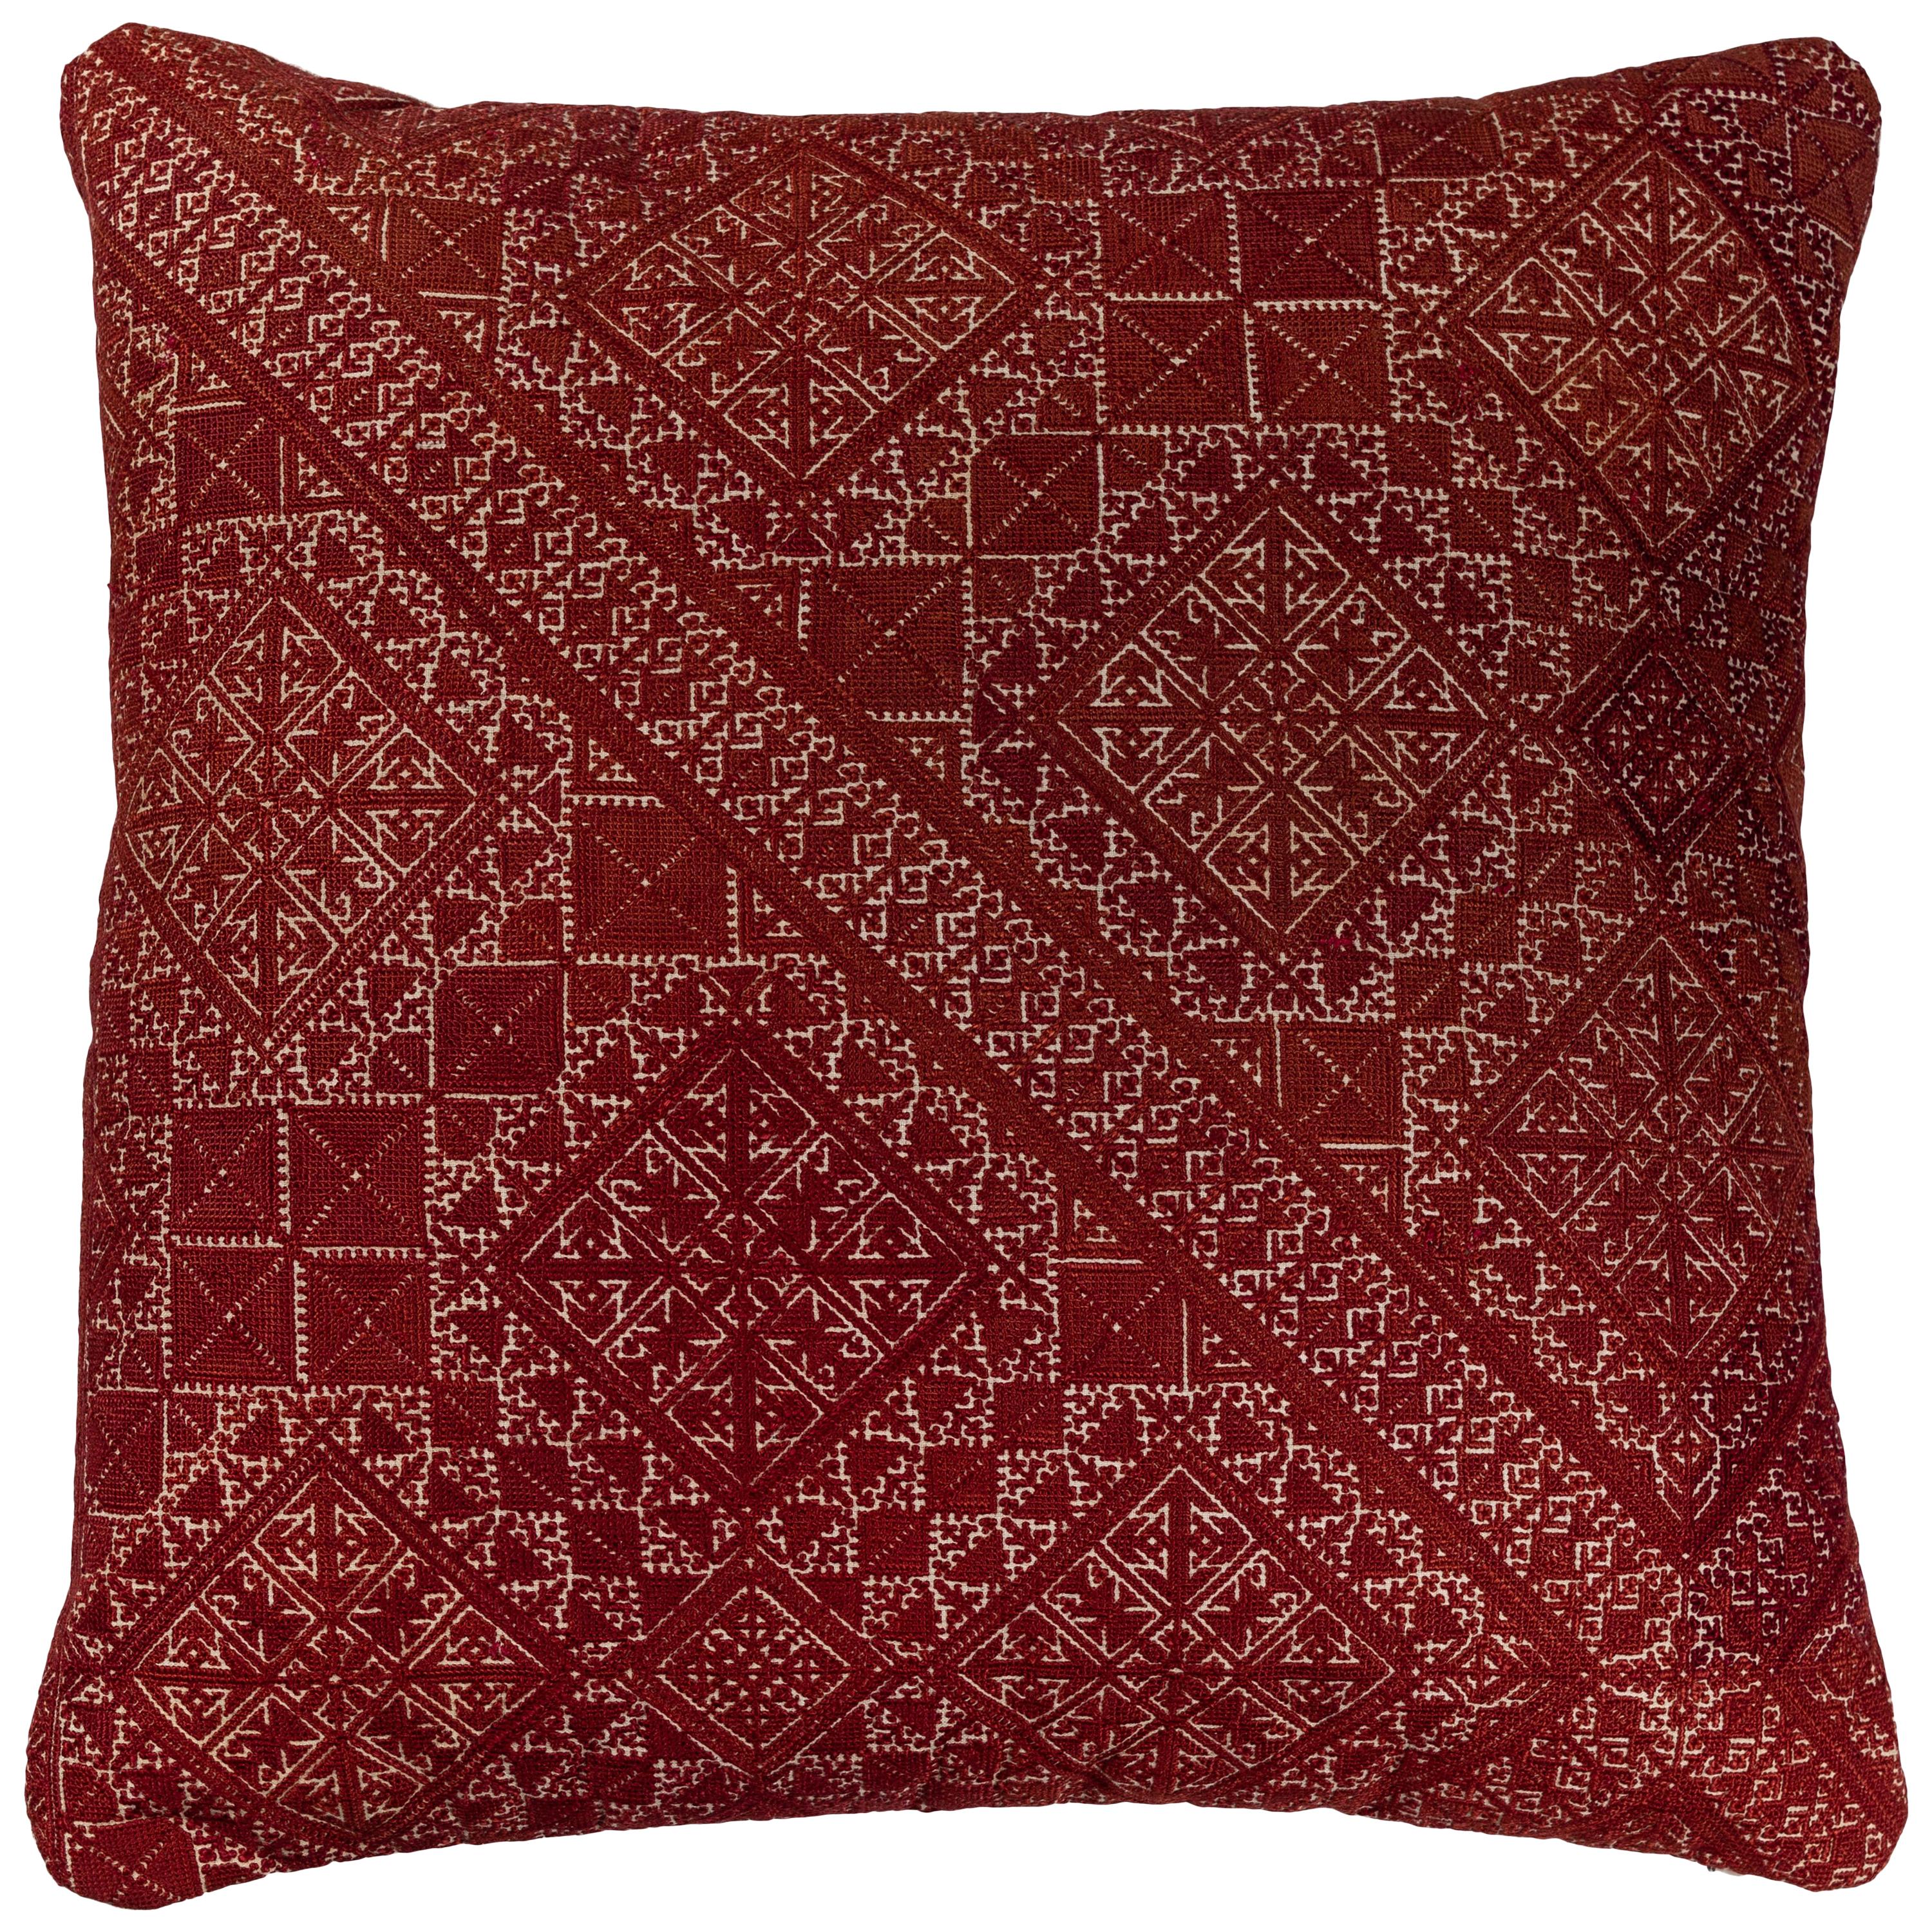 Antique Moroccan Fez Embroidery Pillow For Sale